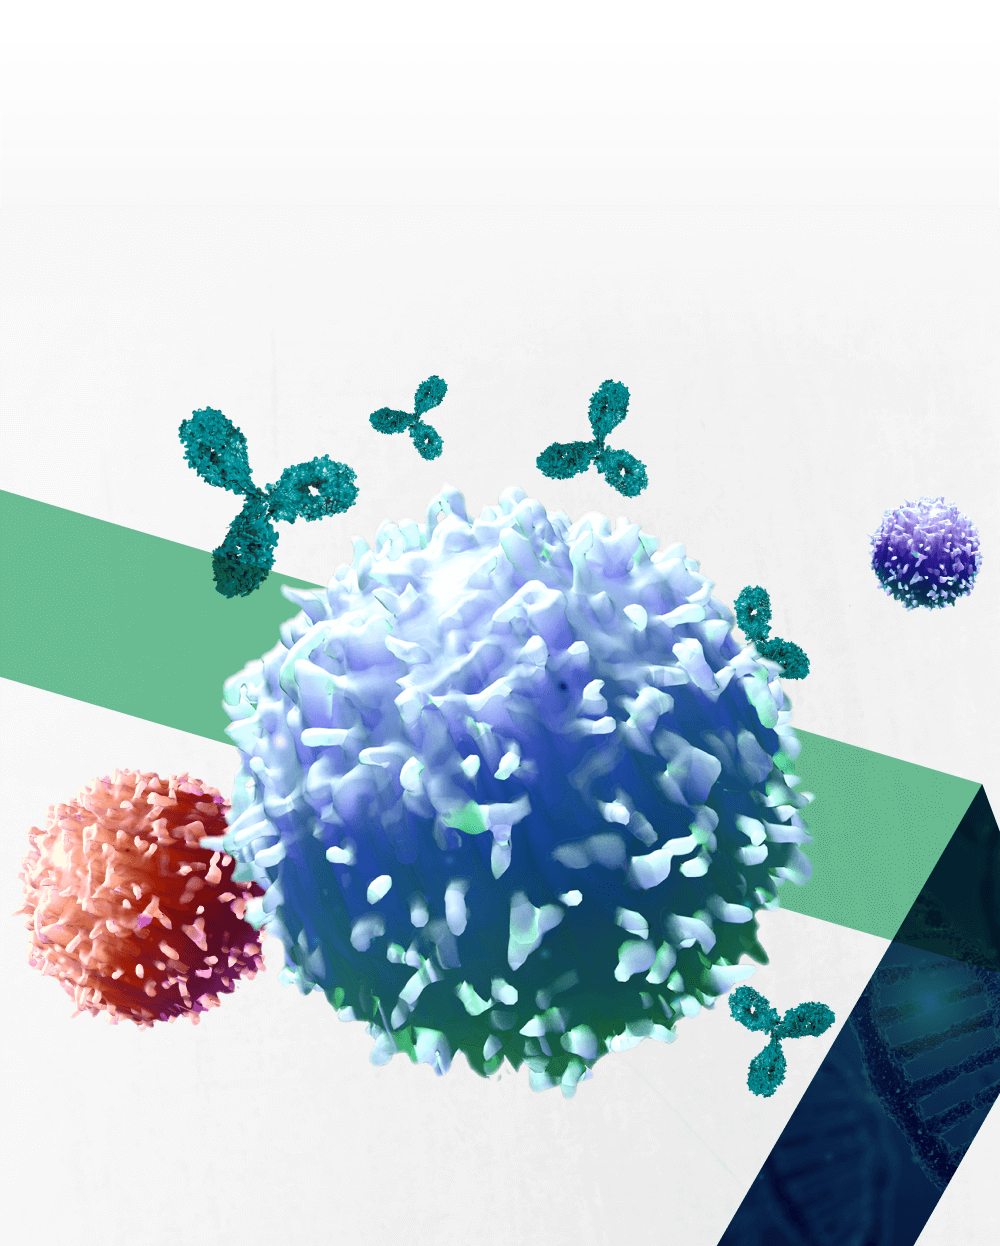 Three T-cells with several antibodies surrounding them.